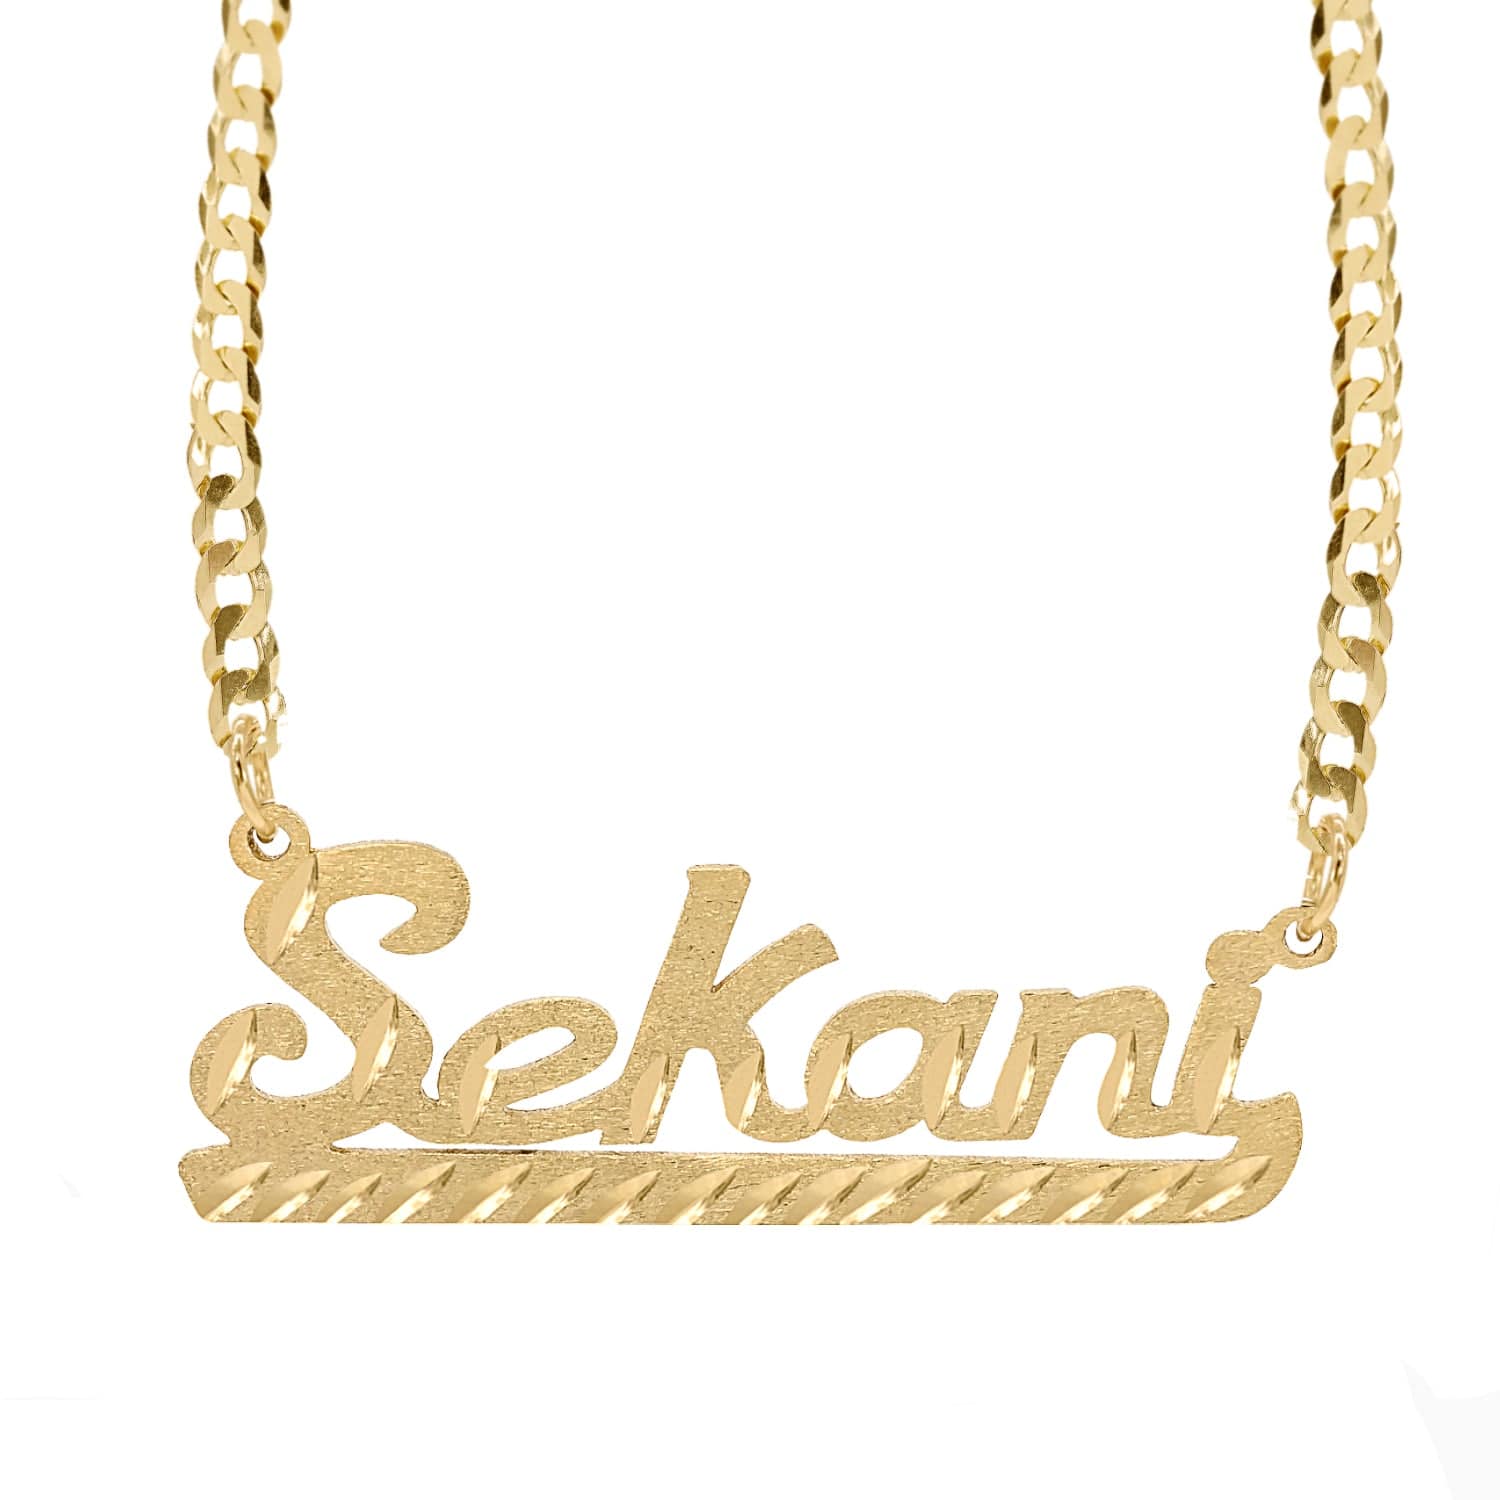 14K Gold over Sterling Silver / Cuban Chain Copy of Personalized Name necklace with Diamond Cut "Tammy"